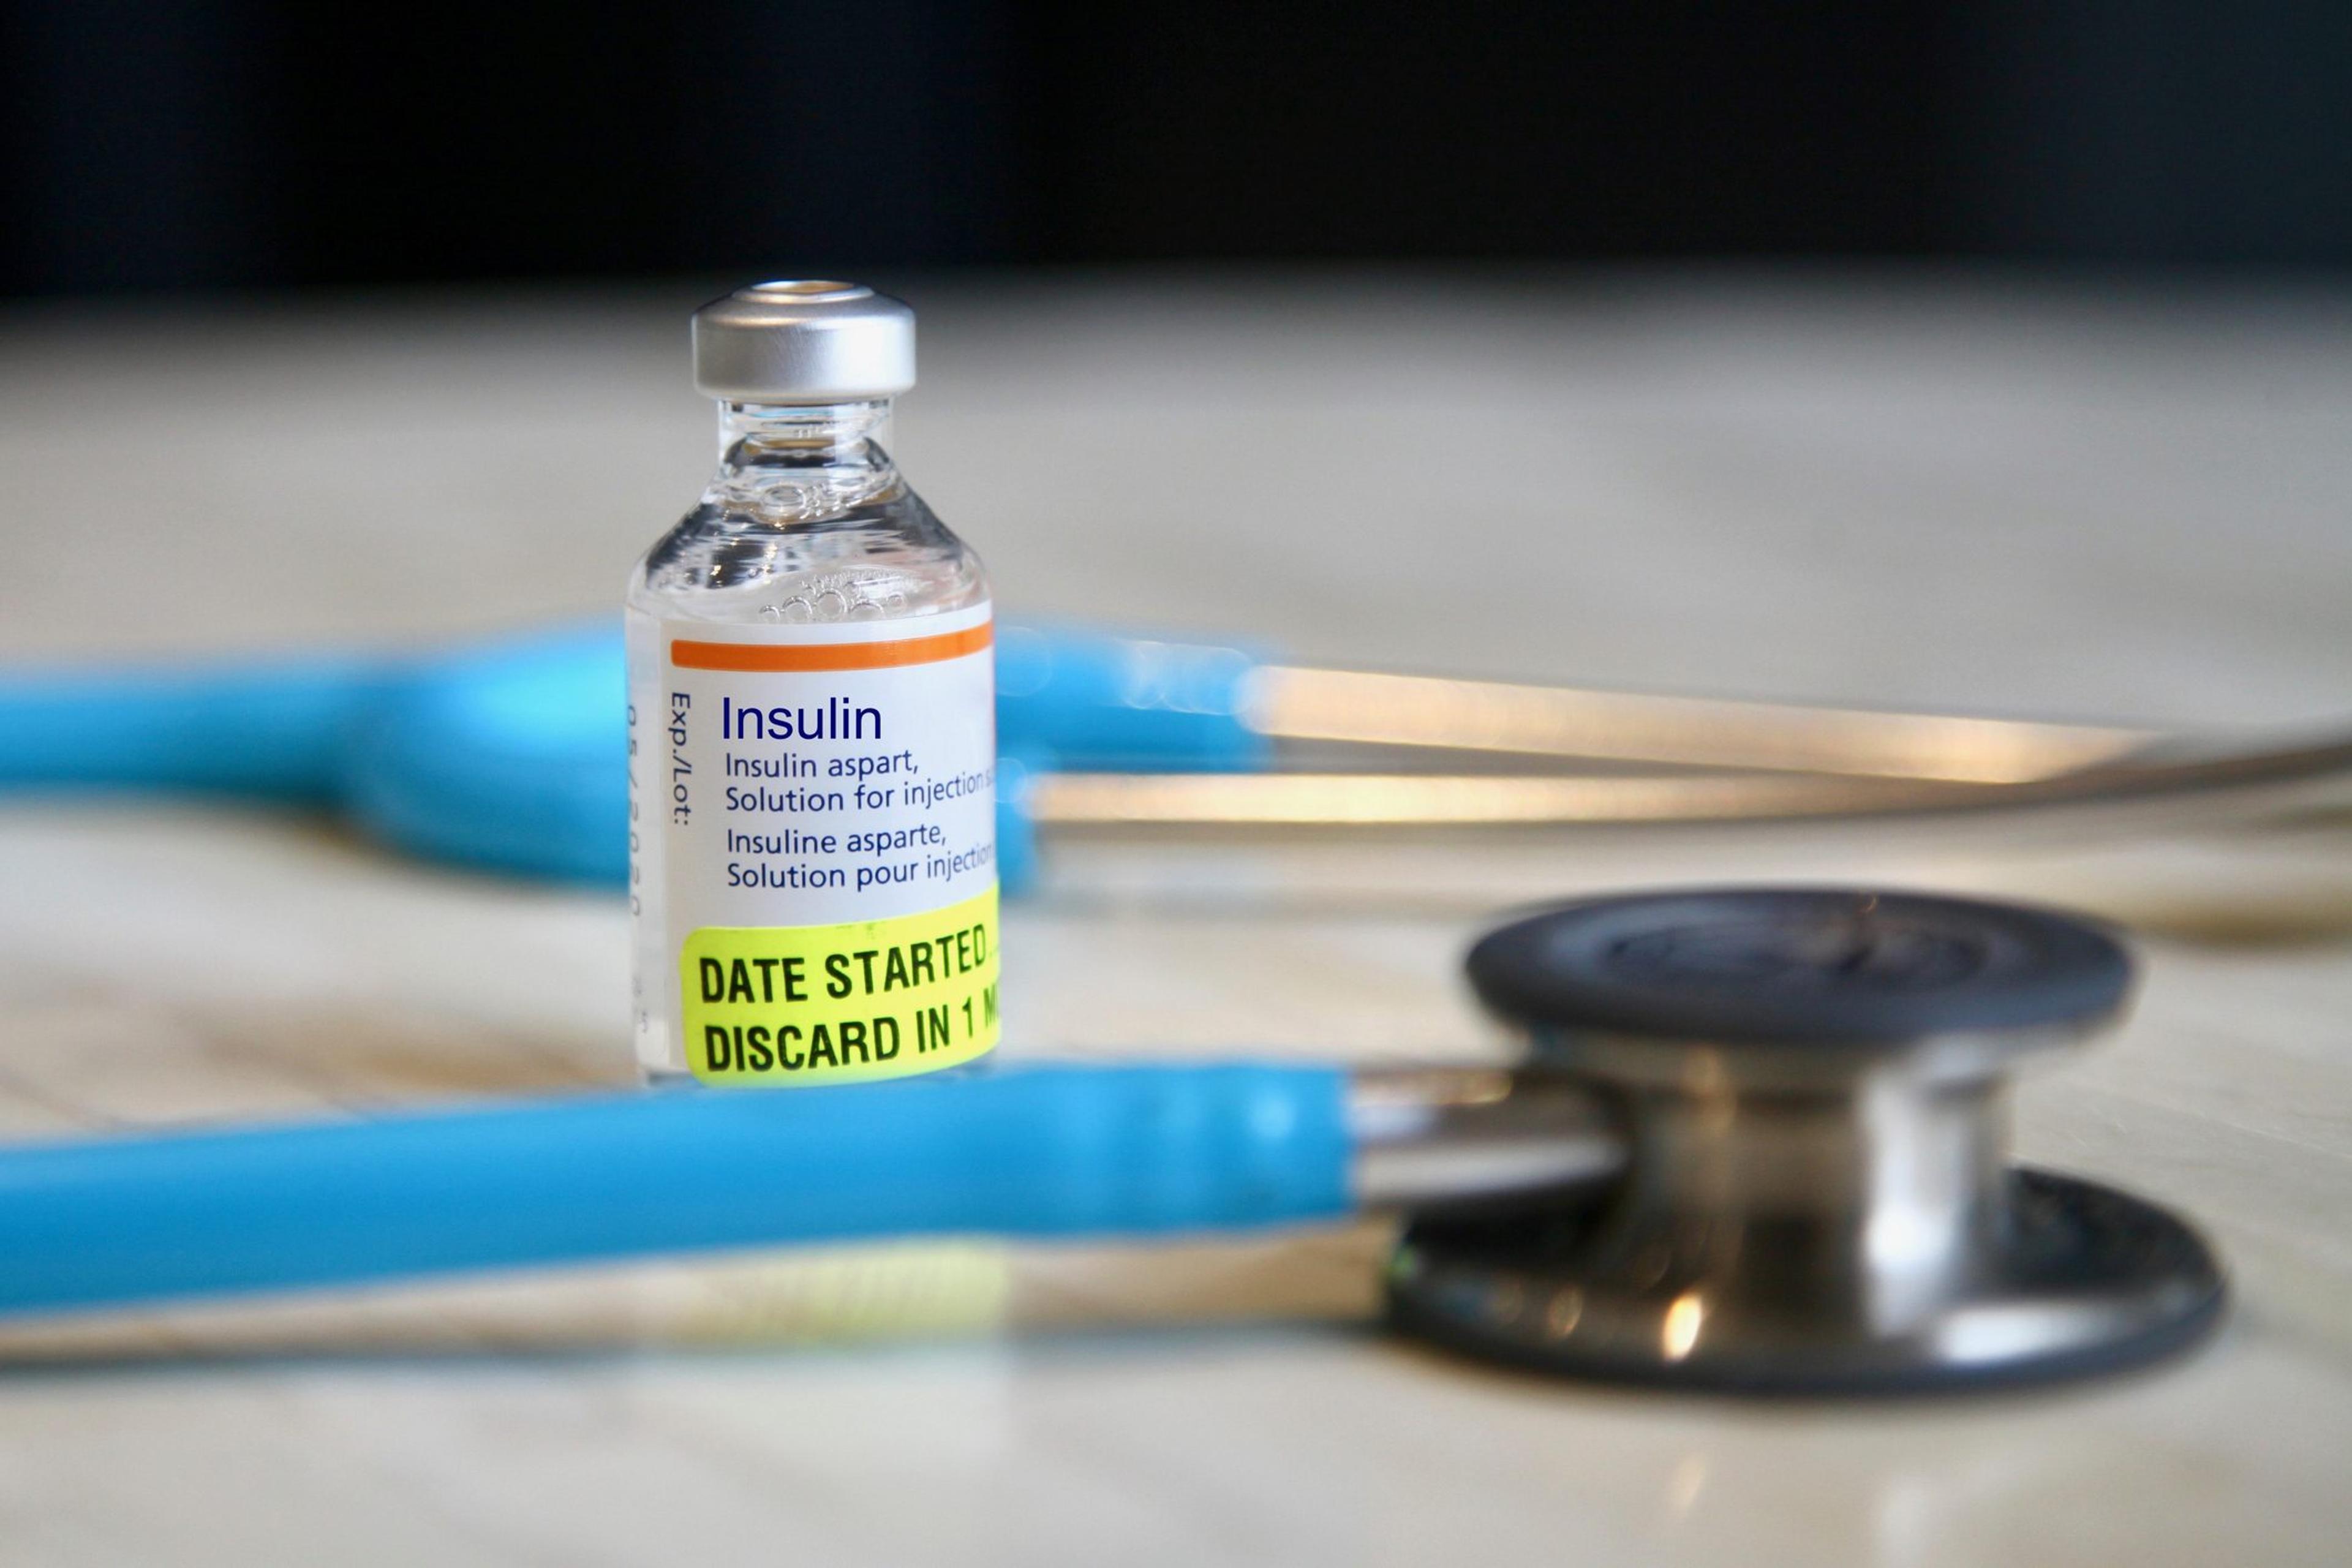 Lower-cost insulin vial sitting on a table next to a stethoscope